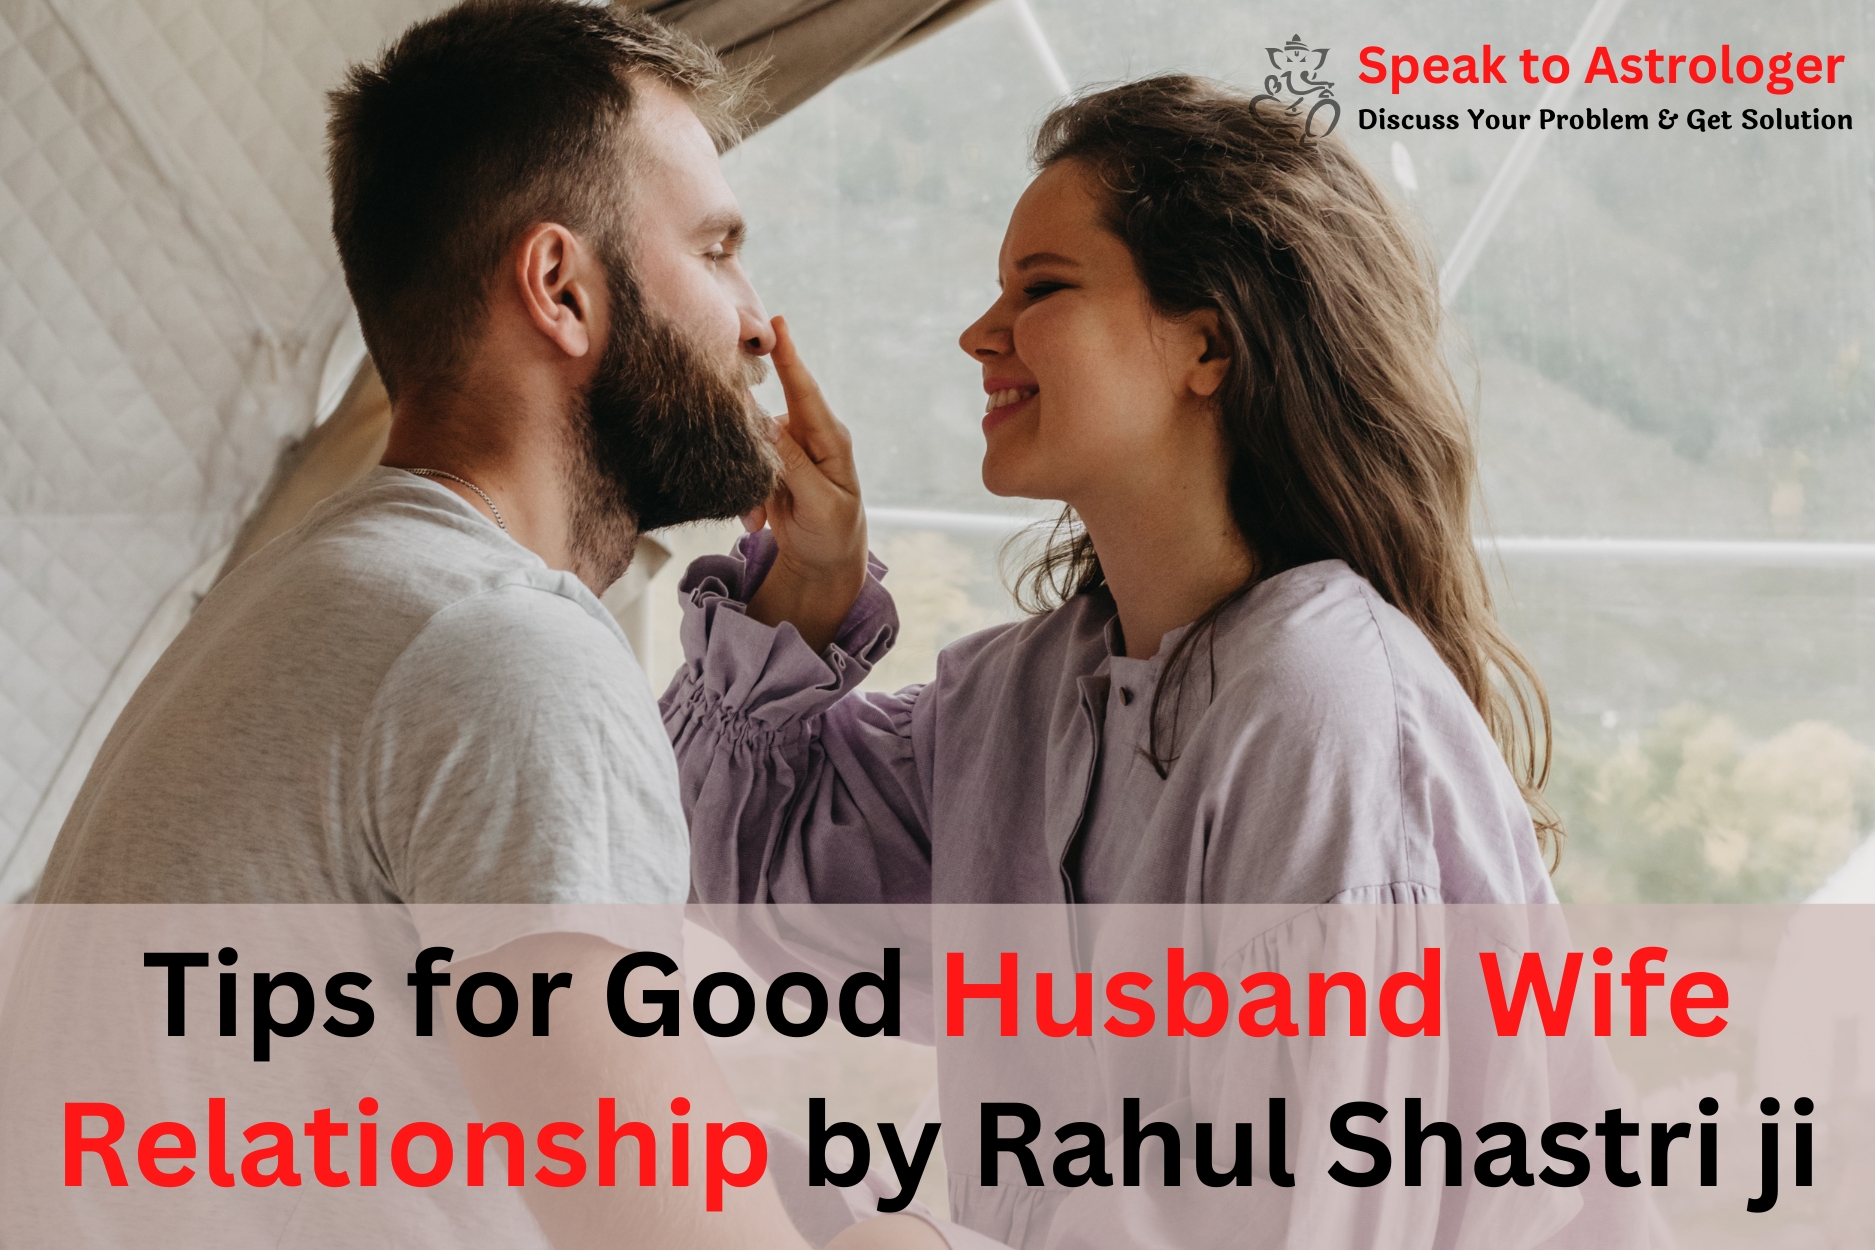 Tips for Good Husband Wife Relationship by Rahul Shastri ji